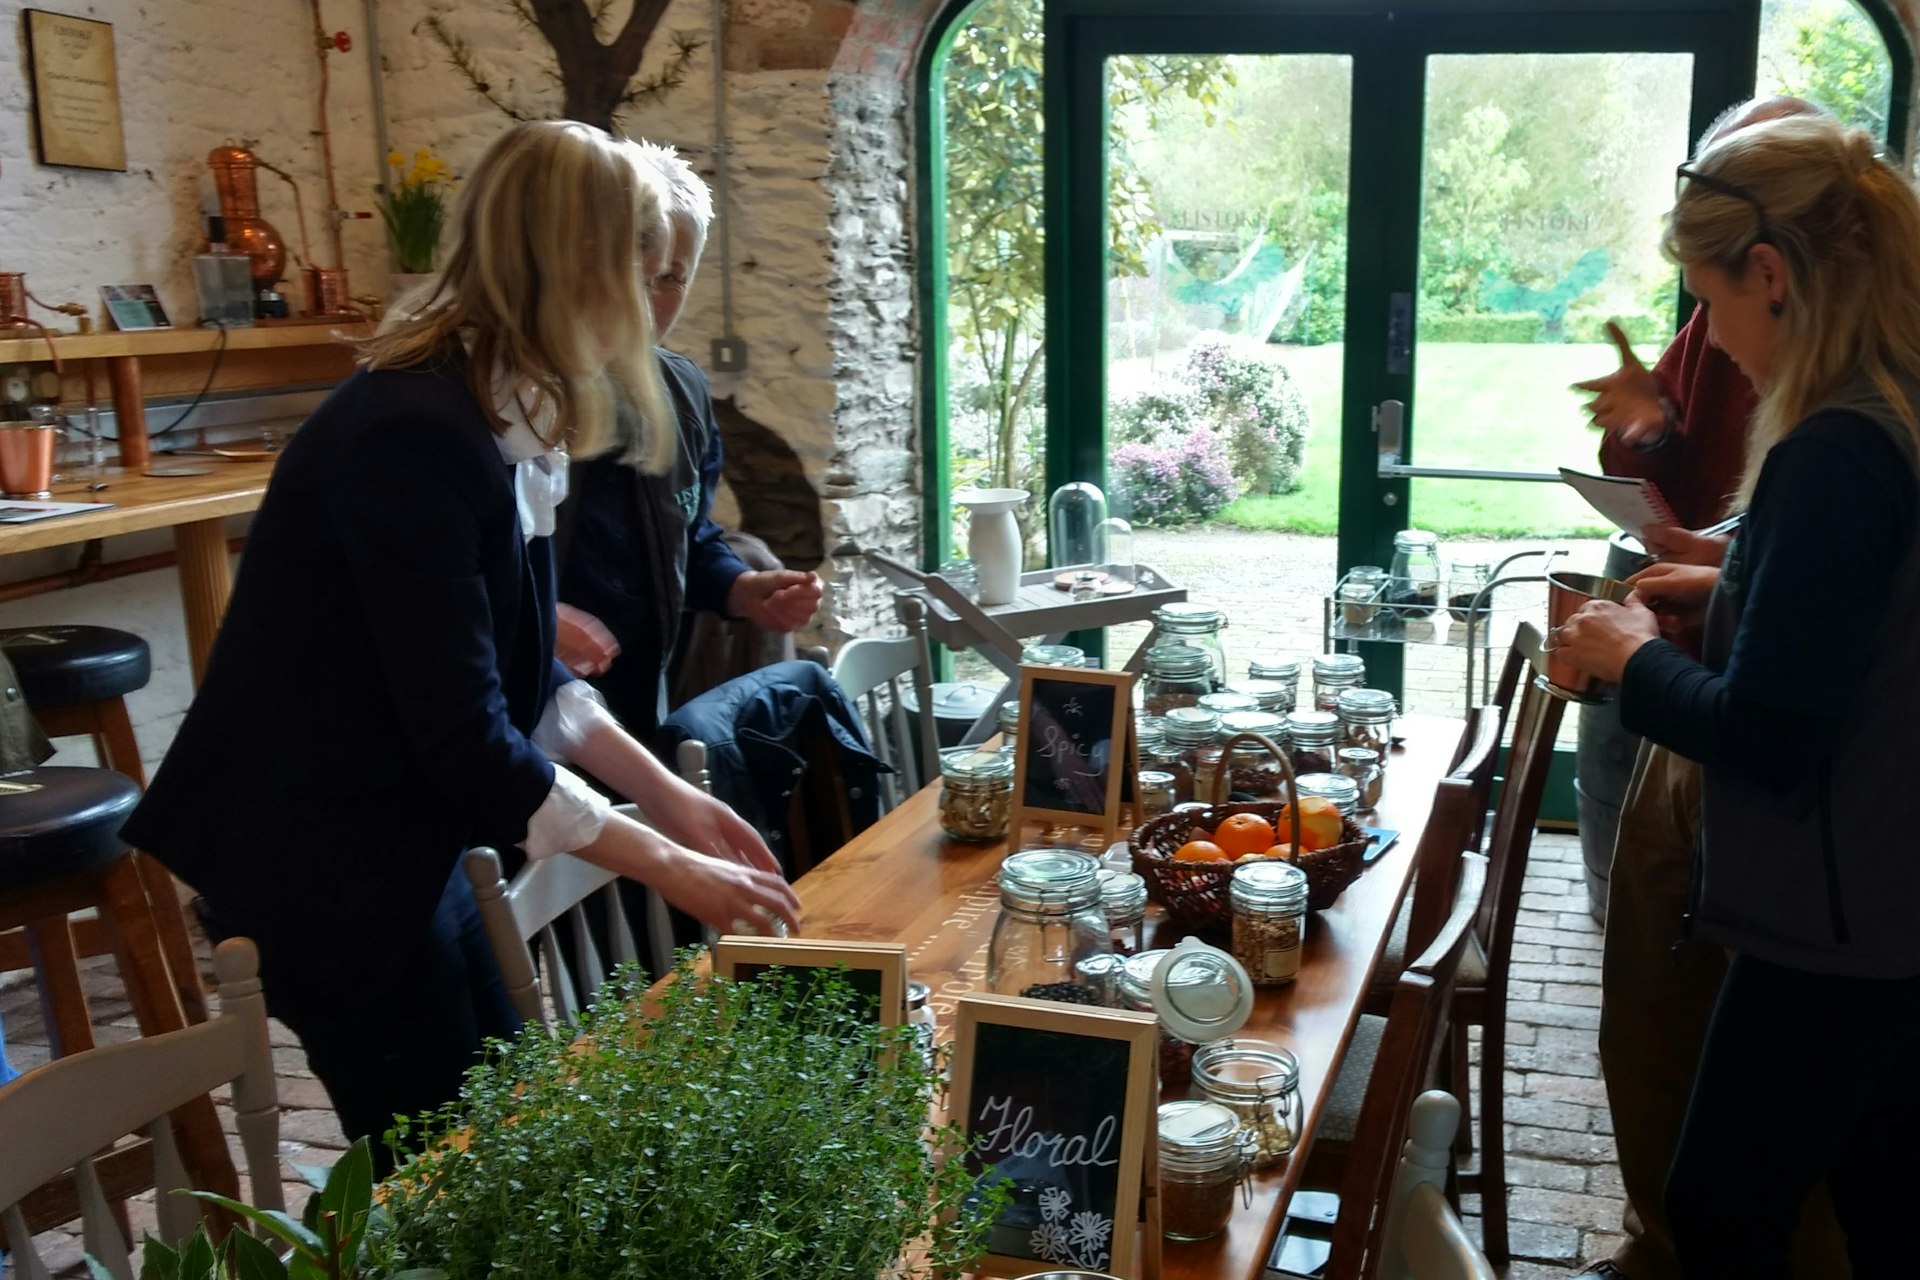 Browsing the botanicals at Listoke Distillery © James Smart / Lonely Planet